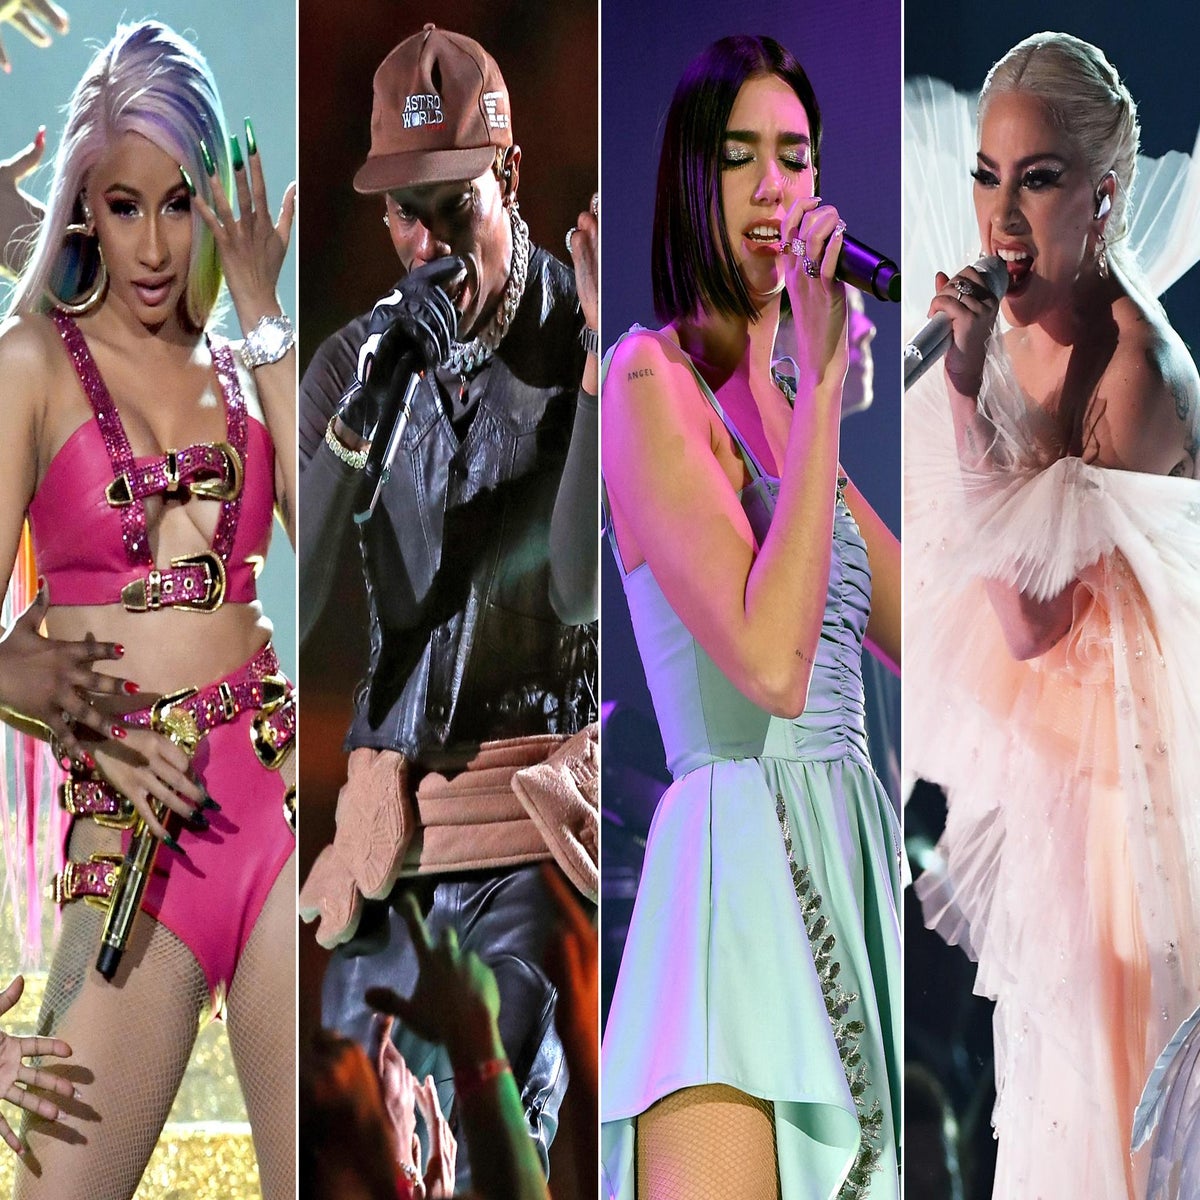 Grammys 2019 performances: Cardi B to Dua Lipa and Travis Scott – Full list  of artists performing at this year's awards ceremony, The Independent